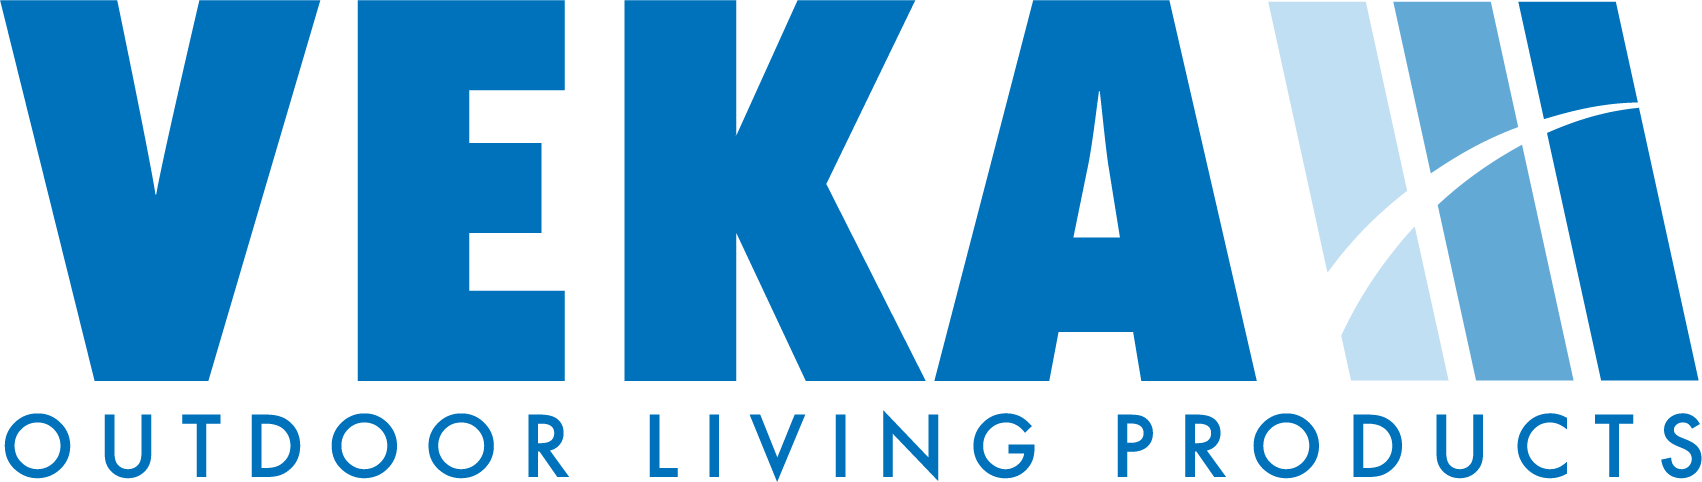 Logo VEKA Outdoor Living Products